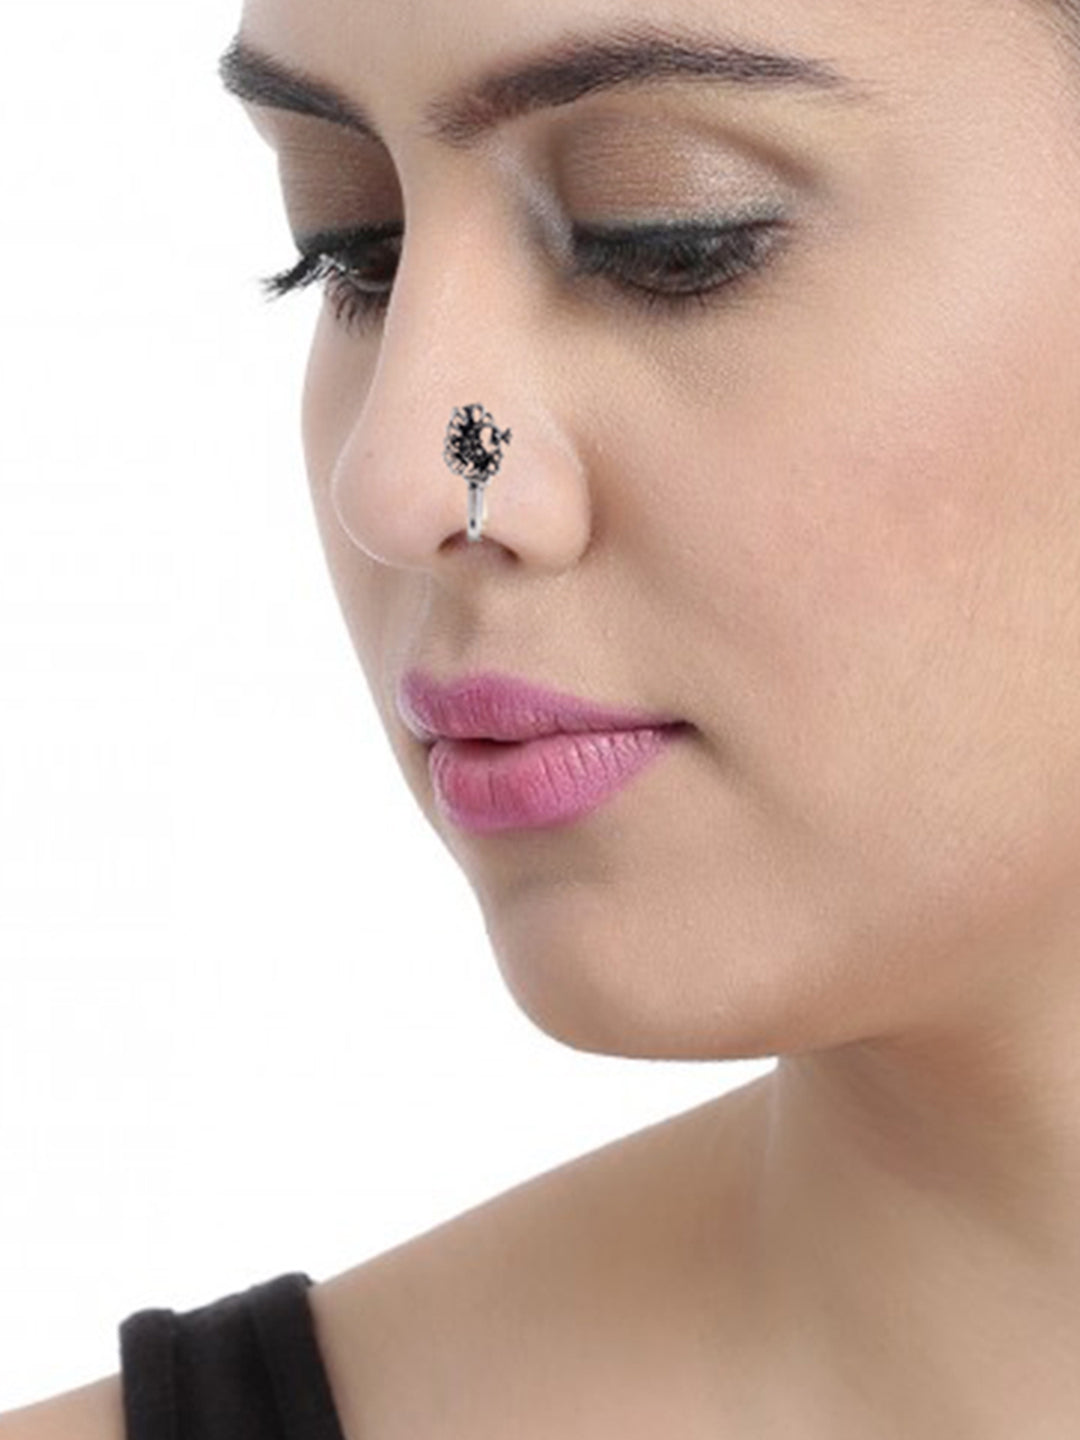 Silver Plated Pierced Nose Ring With Chain Body Jewelry Crystal Nose Hoop  Bridal | eBay